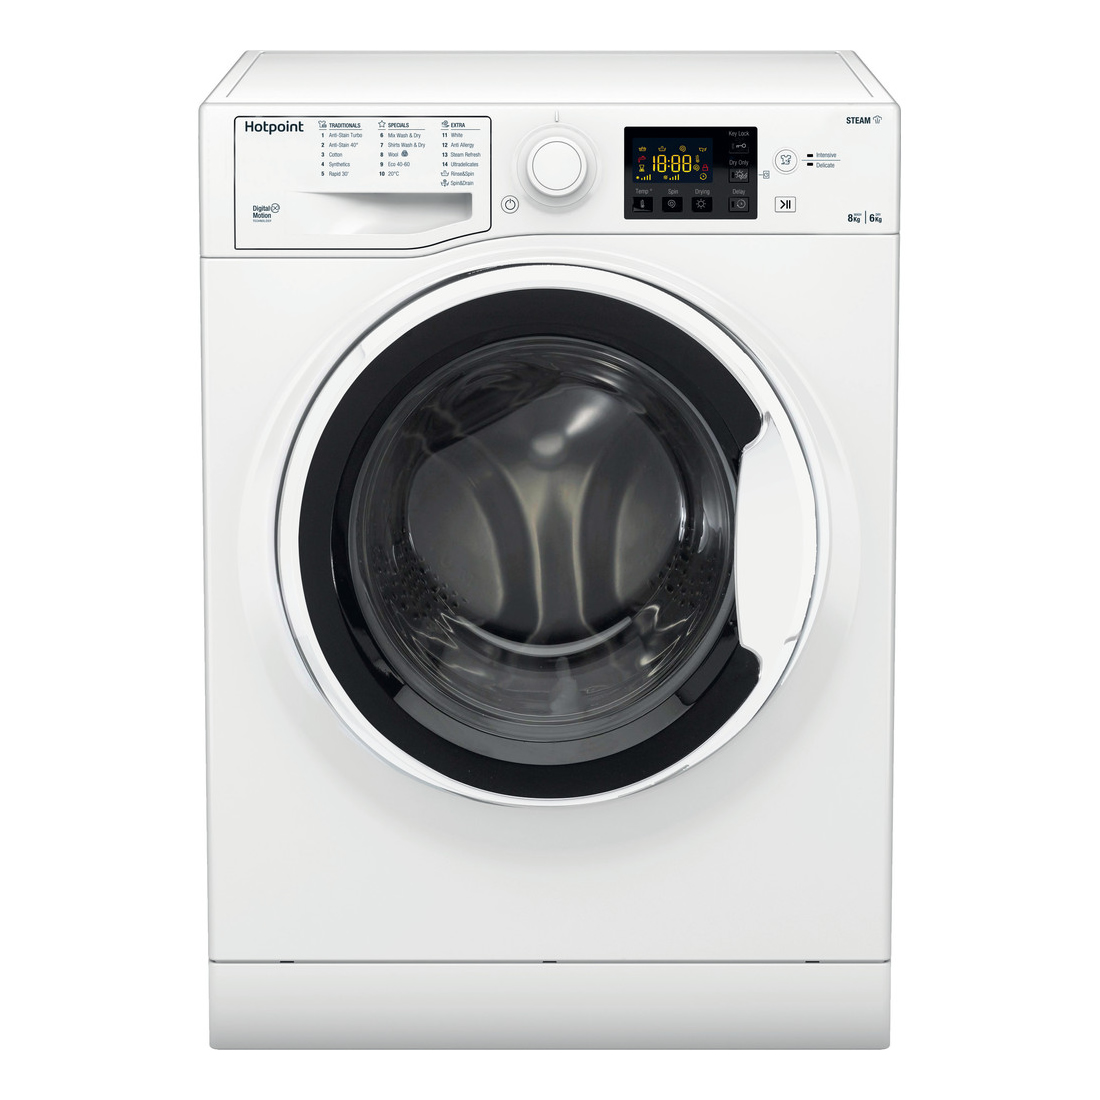 Hotpoint RDG8643WWUKN 8Kg / 6Kg Washer Dryer with 1400 rpm - White - D Rated